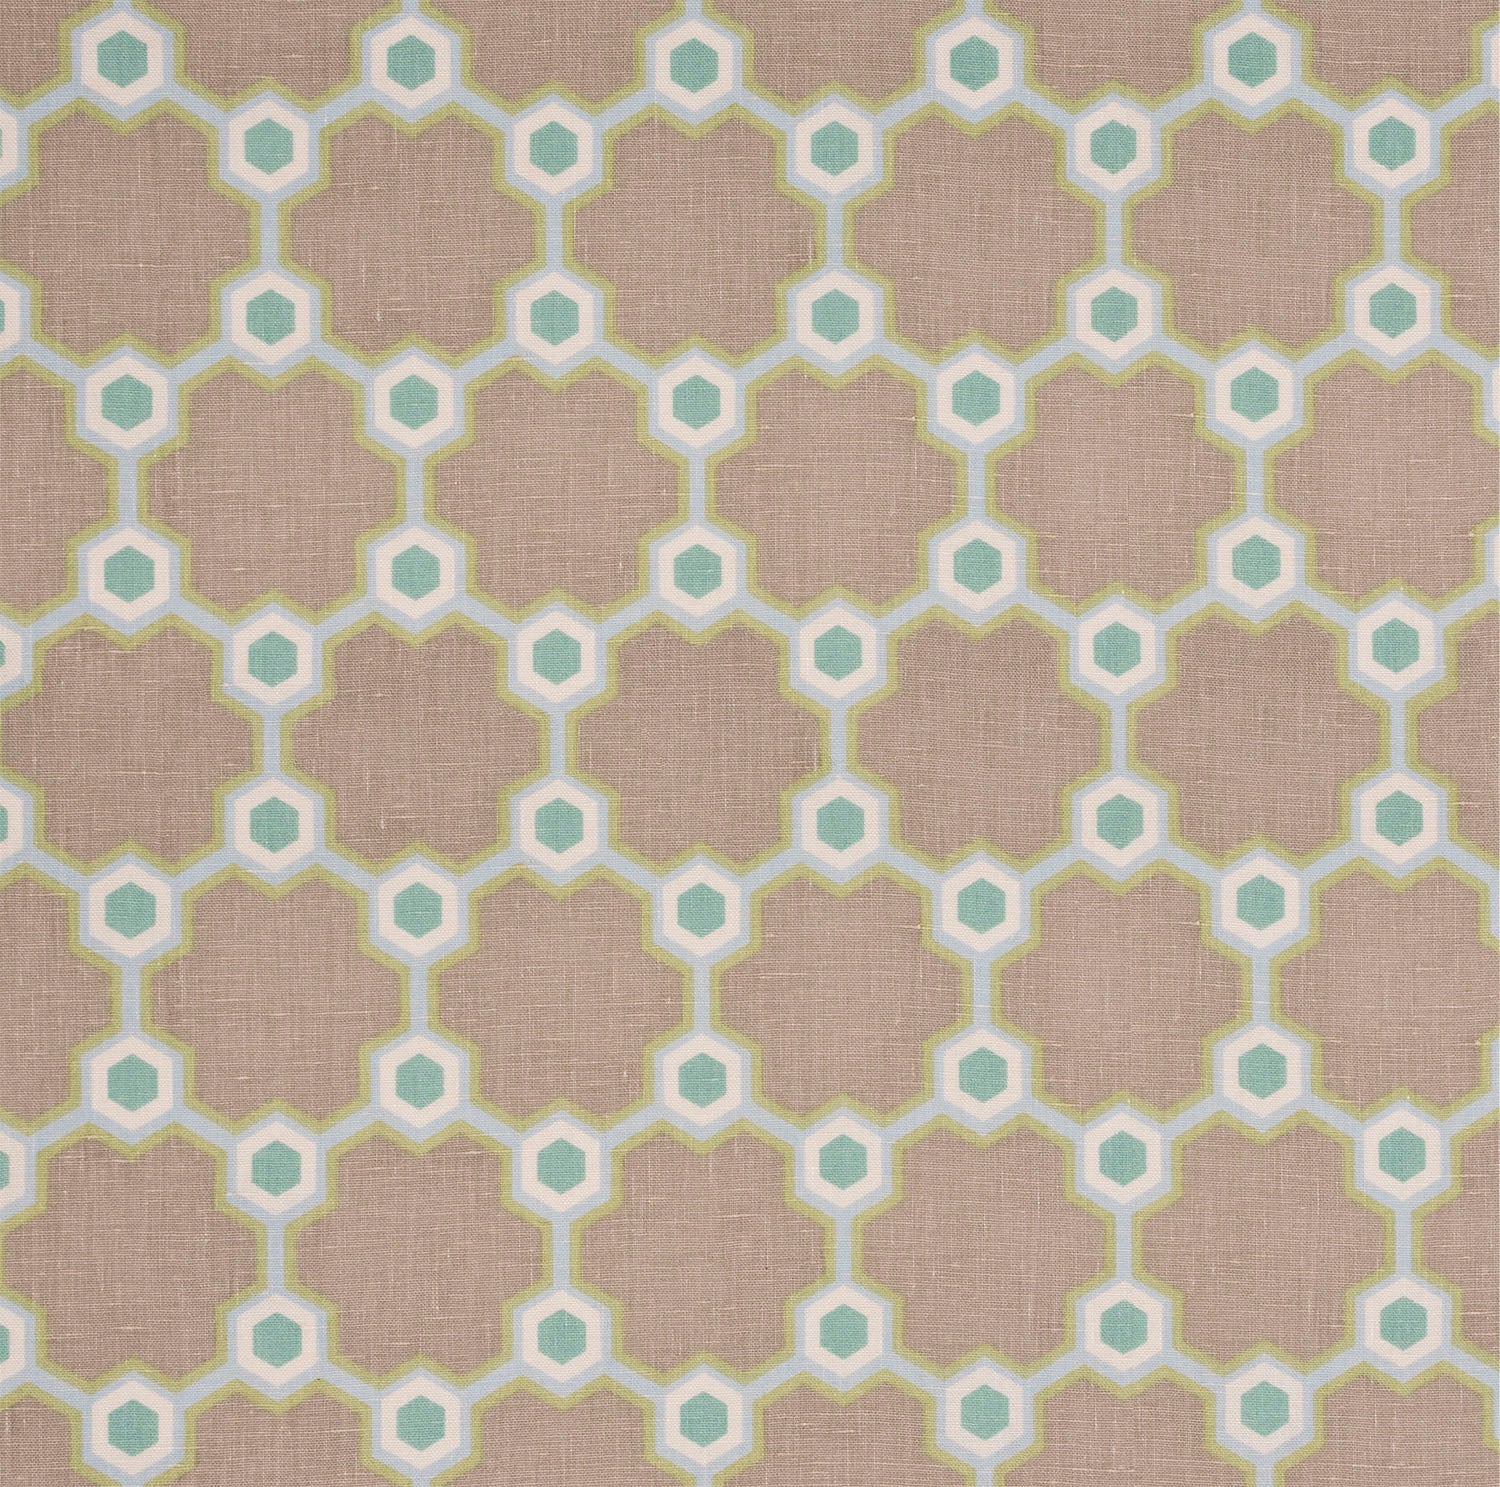 Detail of fabric in a geometric honeycomb pattern in shades of green, blue, cream and brown.